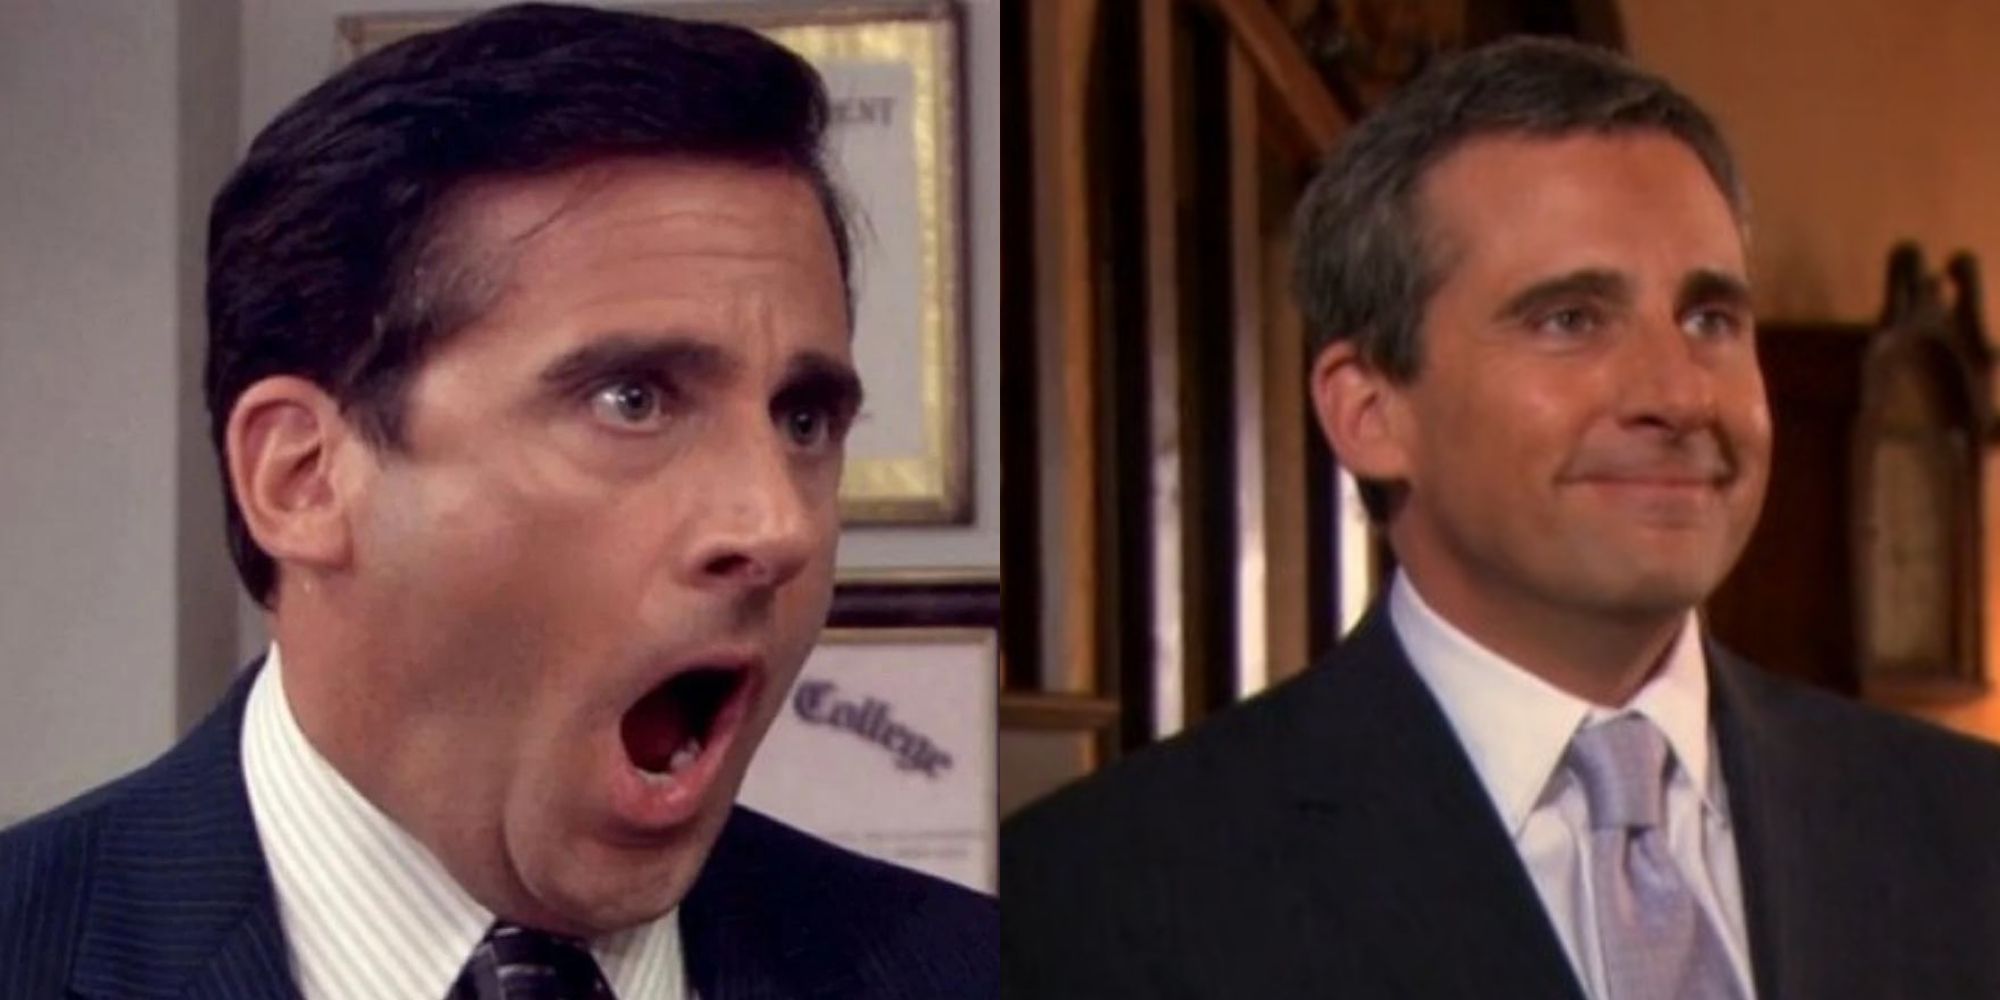 Steve Carell in The Office as Michael Scott Before & After